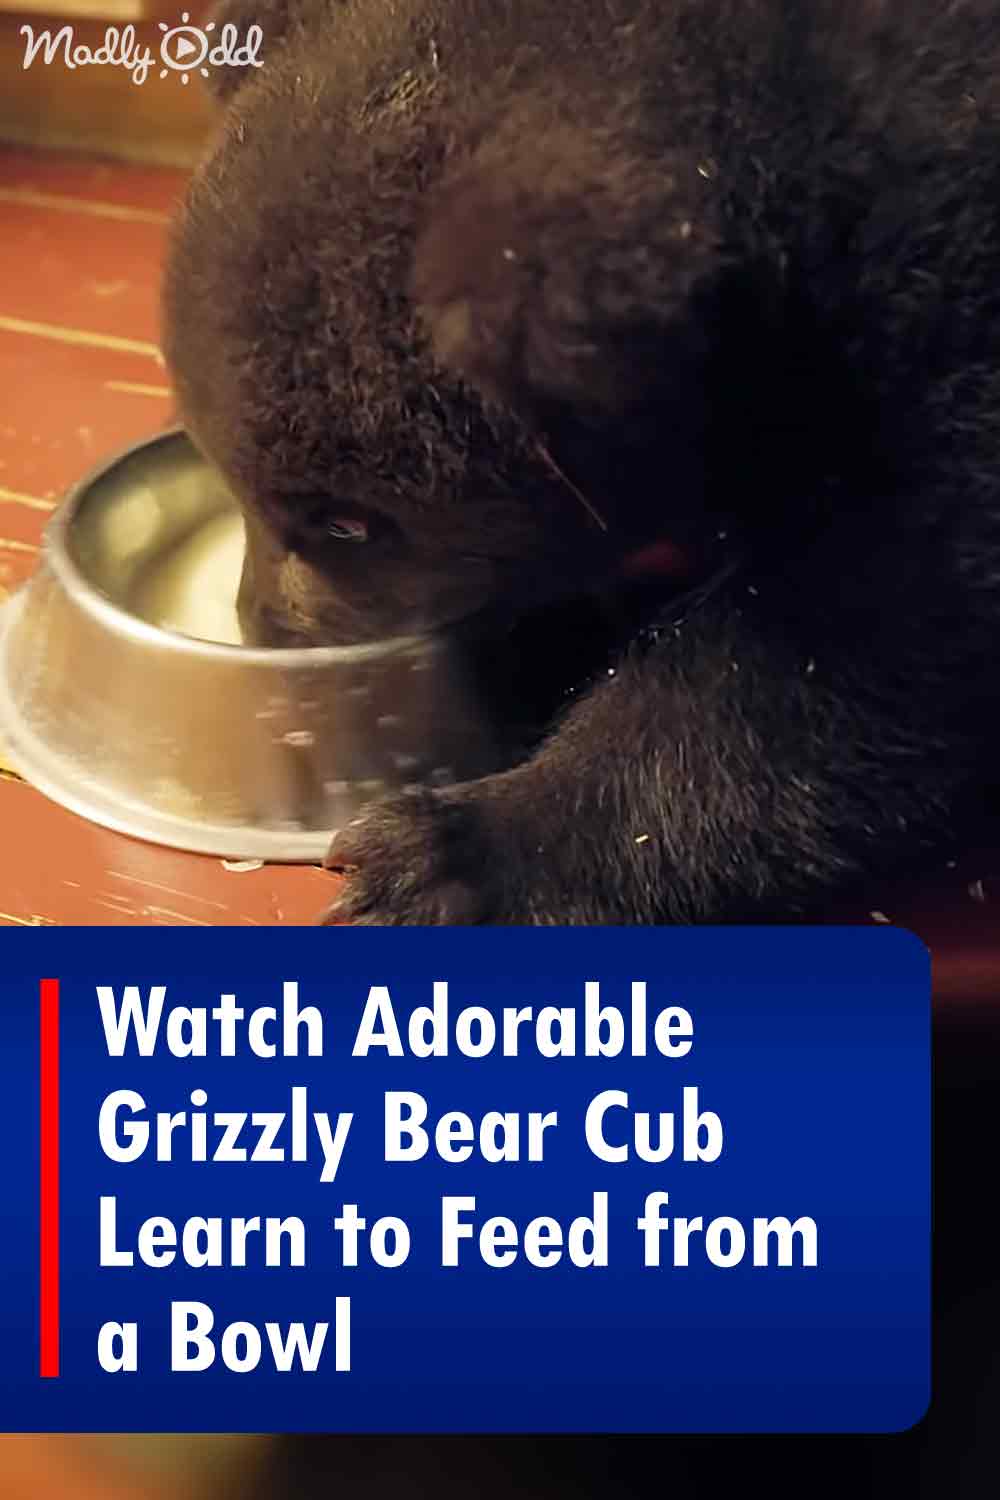 Watch Adorable Grizzly Bear Cub Learn to Feed from a Bowl